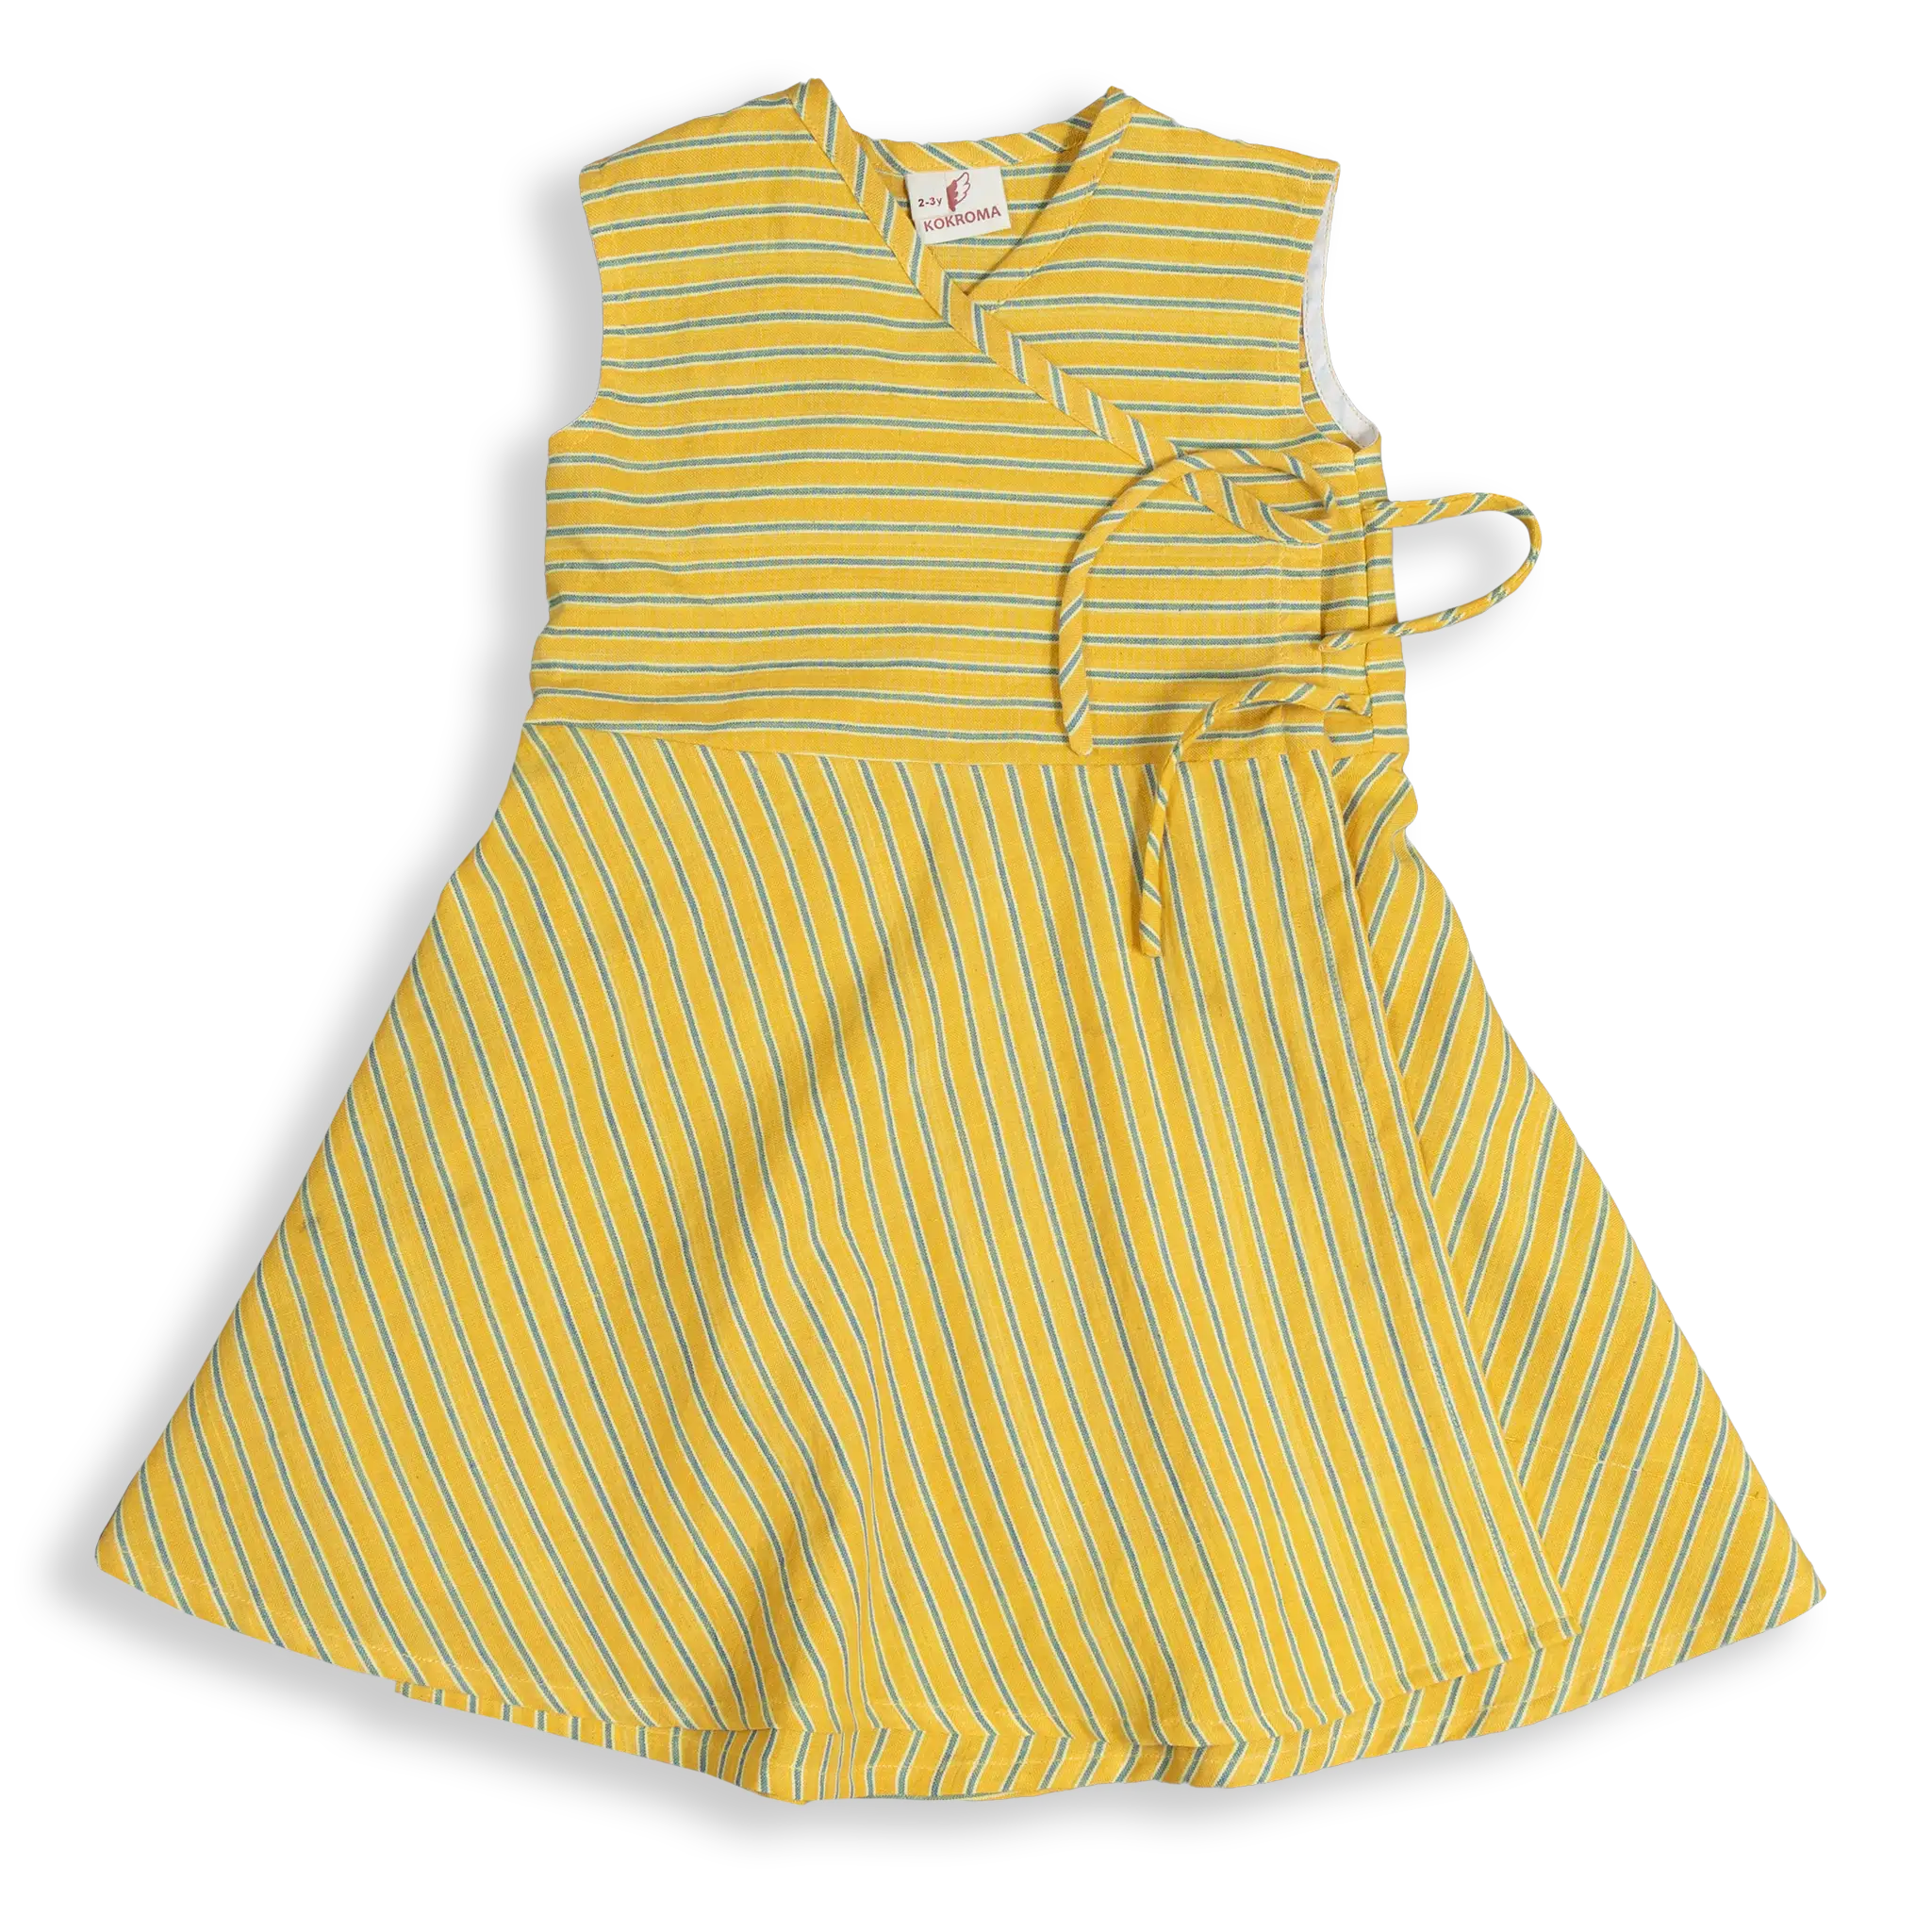 This Wrap Dress is all year round ready! Tastefully wrap up any look with an adjustable fit that'll grow with your child. Perfect for winter, layer it up with a high neck sweater underneath for a super snuggly ensemble. It's quite the wrap star!